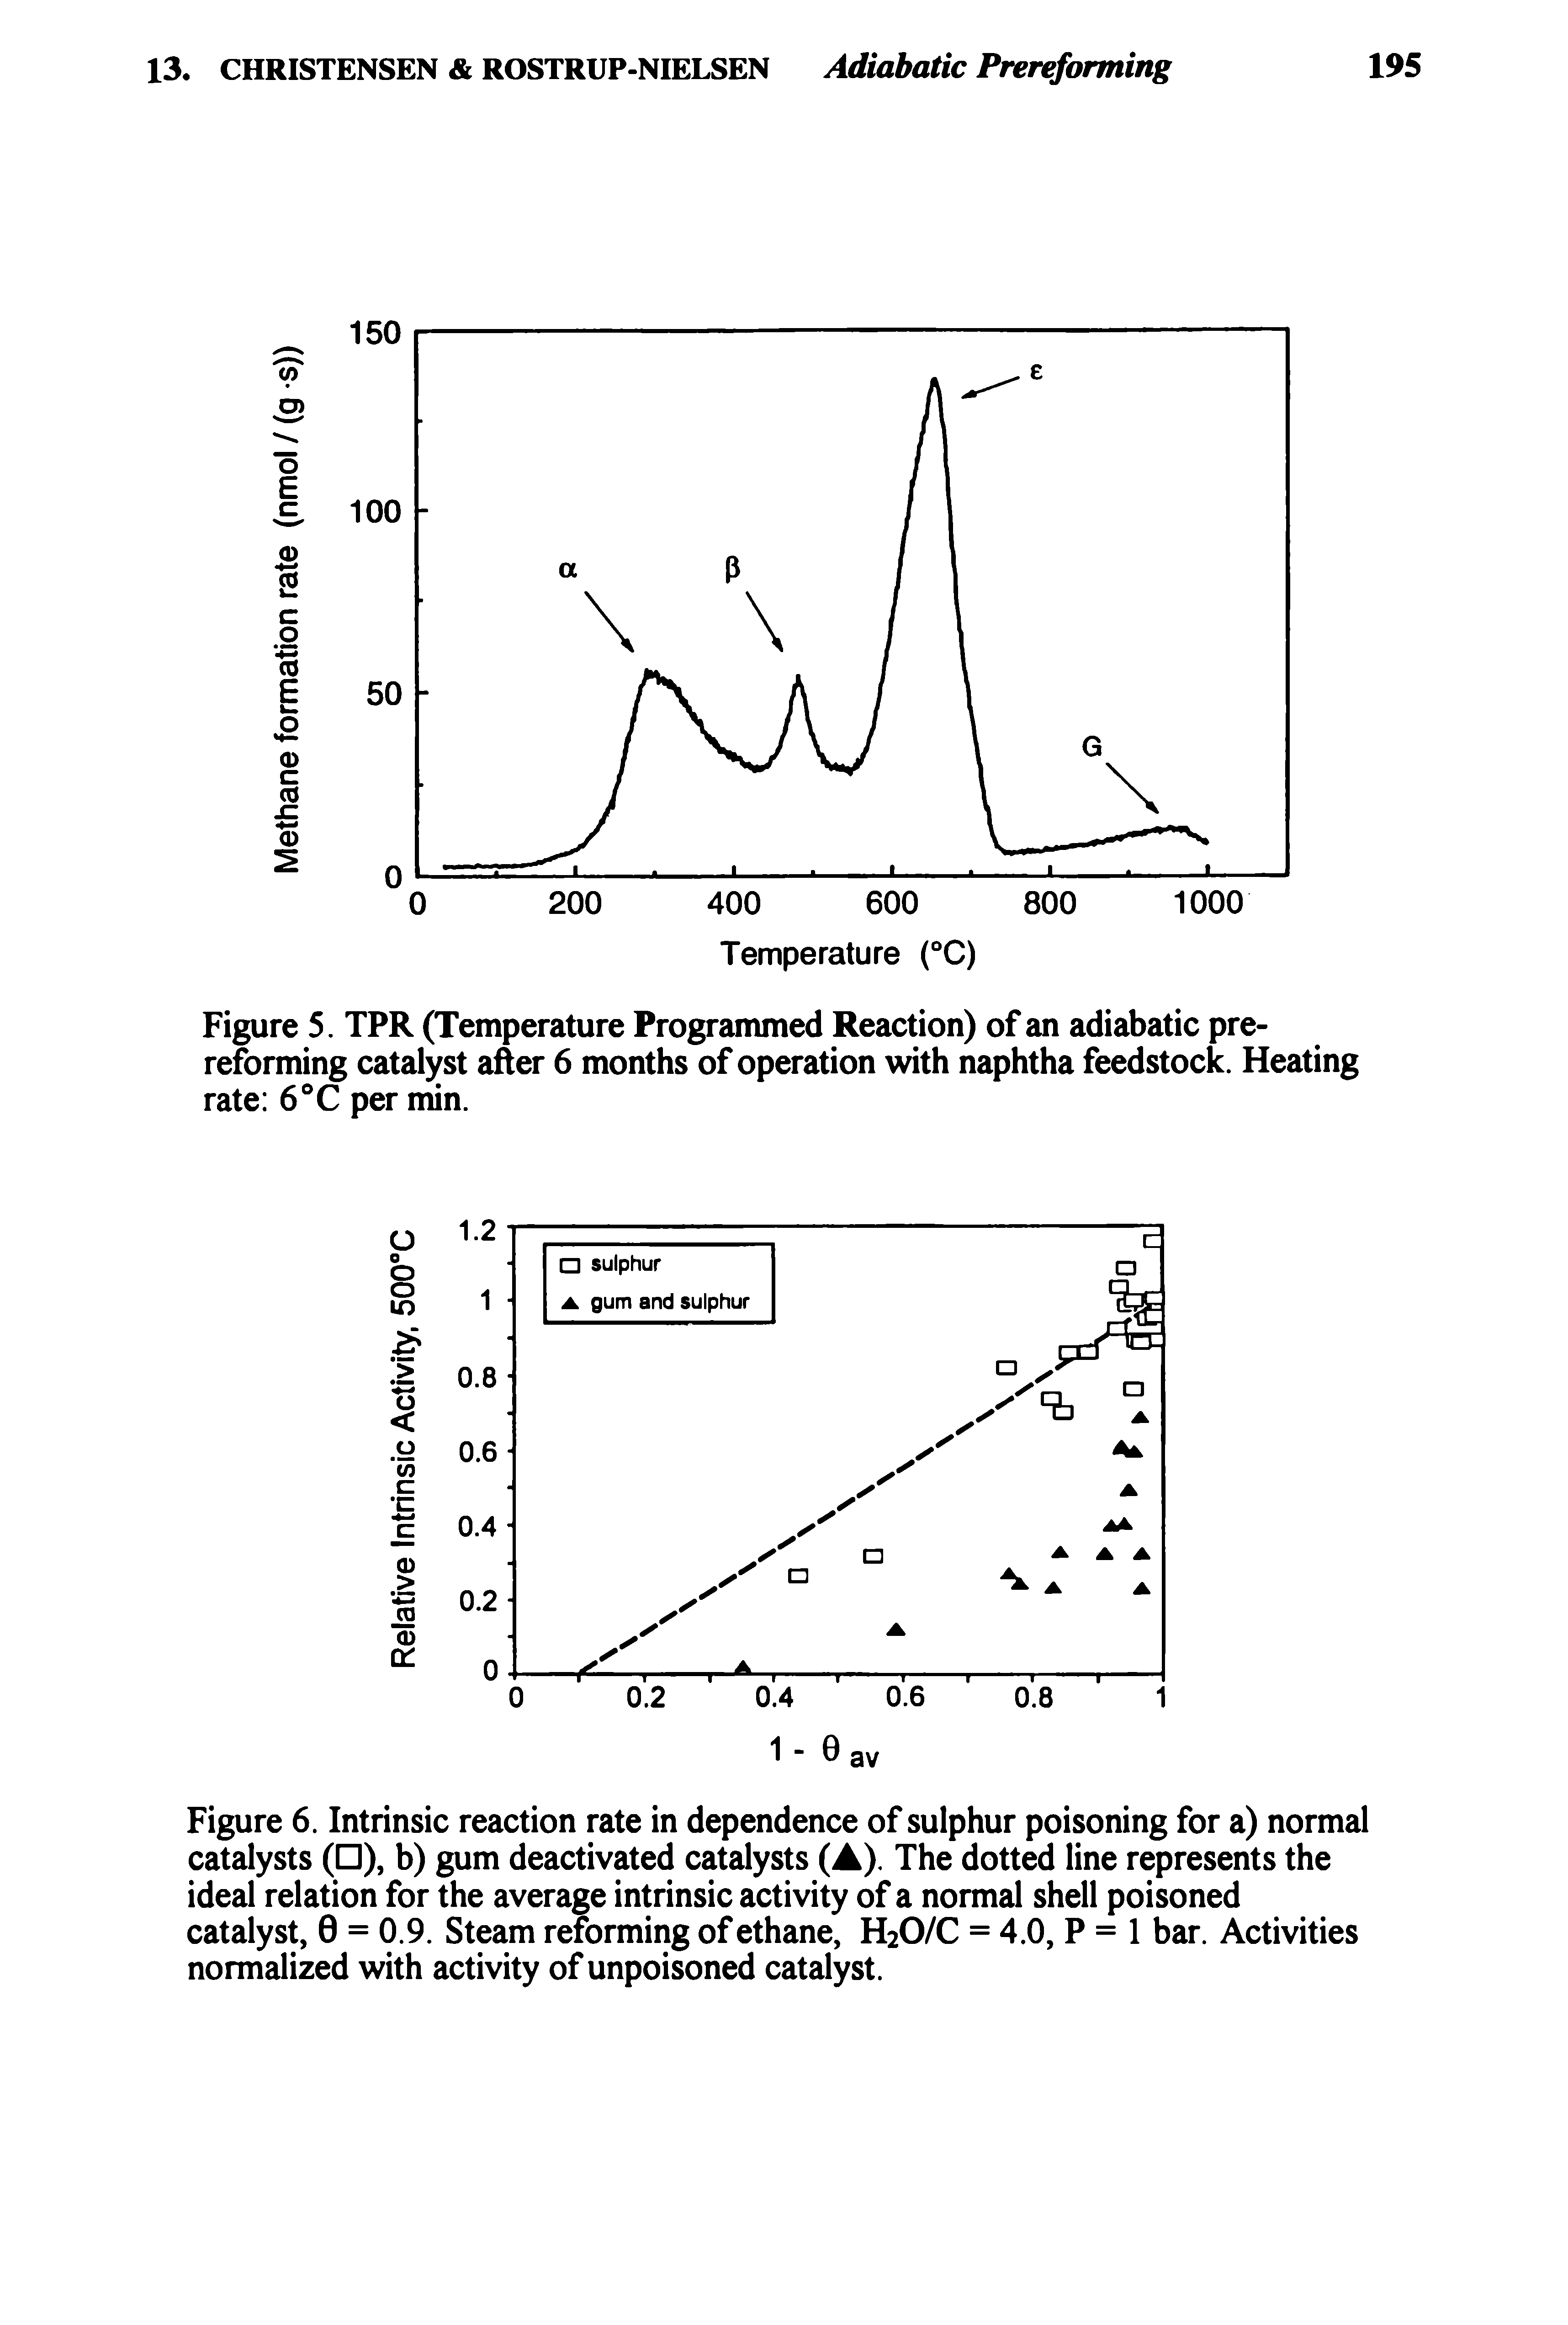 Figure 6. Intrinsic reaction rate in dependence of sulphur poisoning for a) normal catalysts ( ), b) gum deactivated catalysts (A). The dotted line represents the ideal relation for the average intrinsic activity of a normal shell poisoned catalyst, 0 = 0.9. Steam reforming of ethane, H2O/C = 4.0, P = 1 bar. Activities normalized with activity of unpoisoned catalyst.